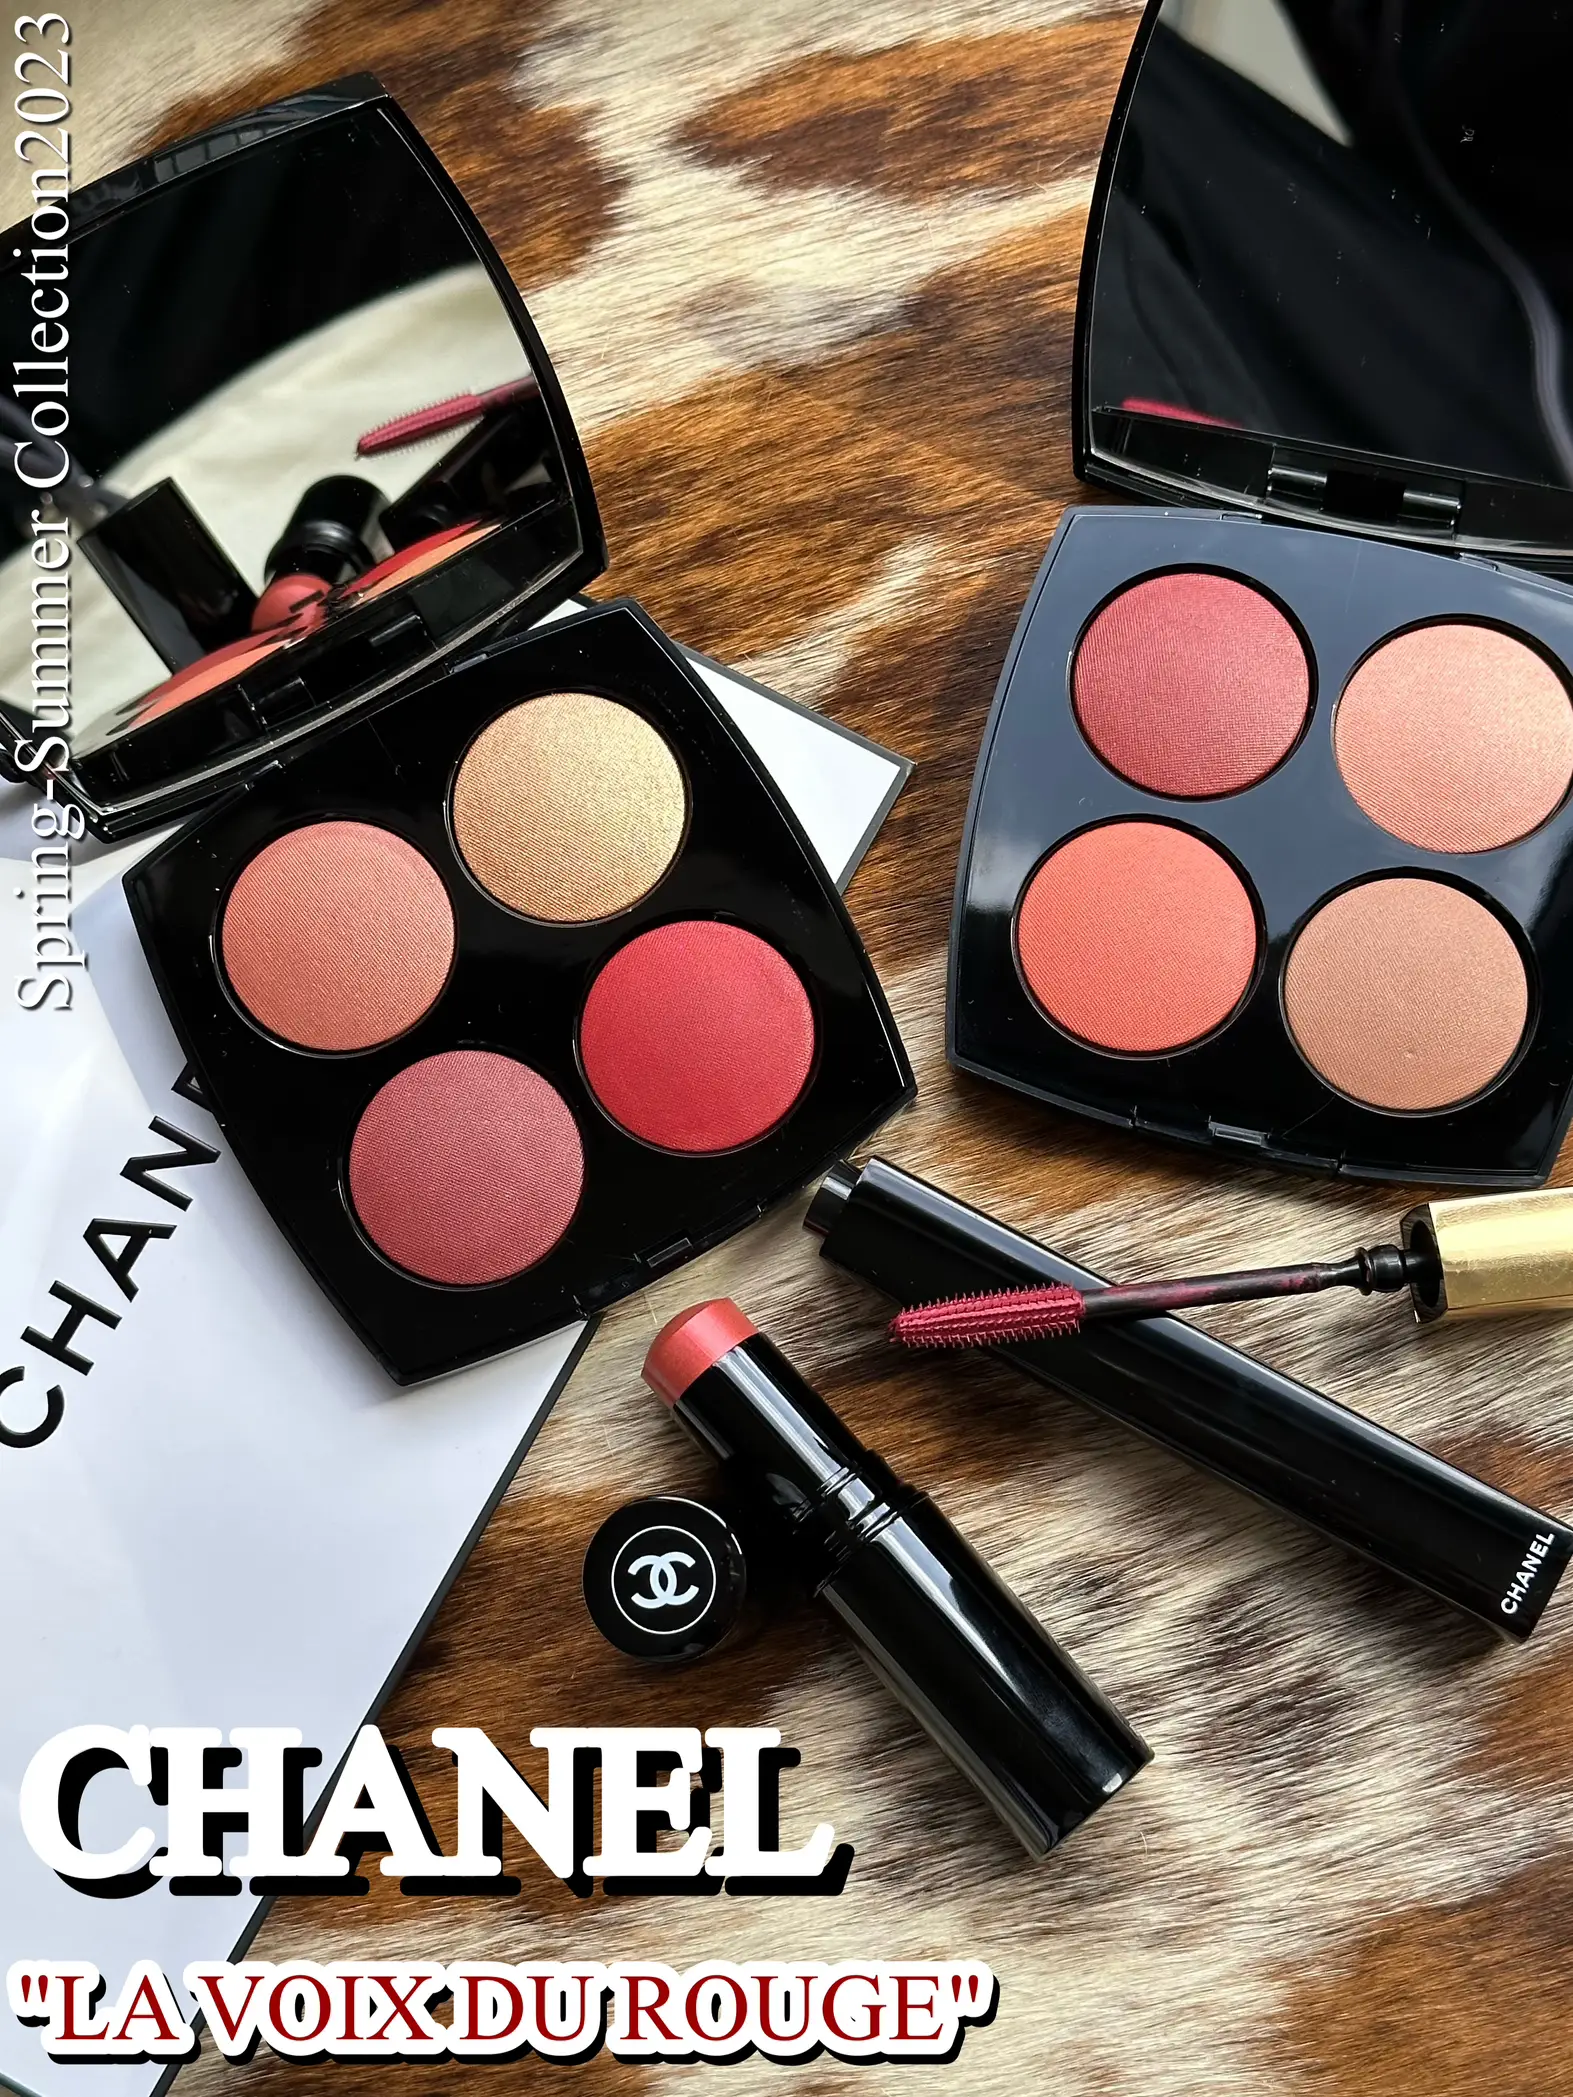 Chanel Spring/Summer 2020 Makeup Collection